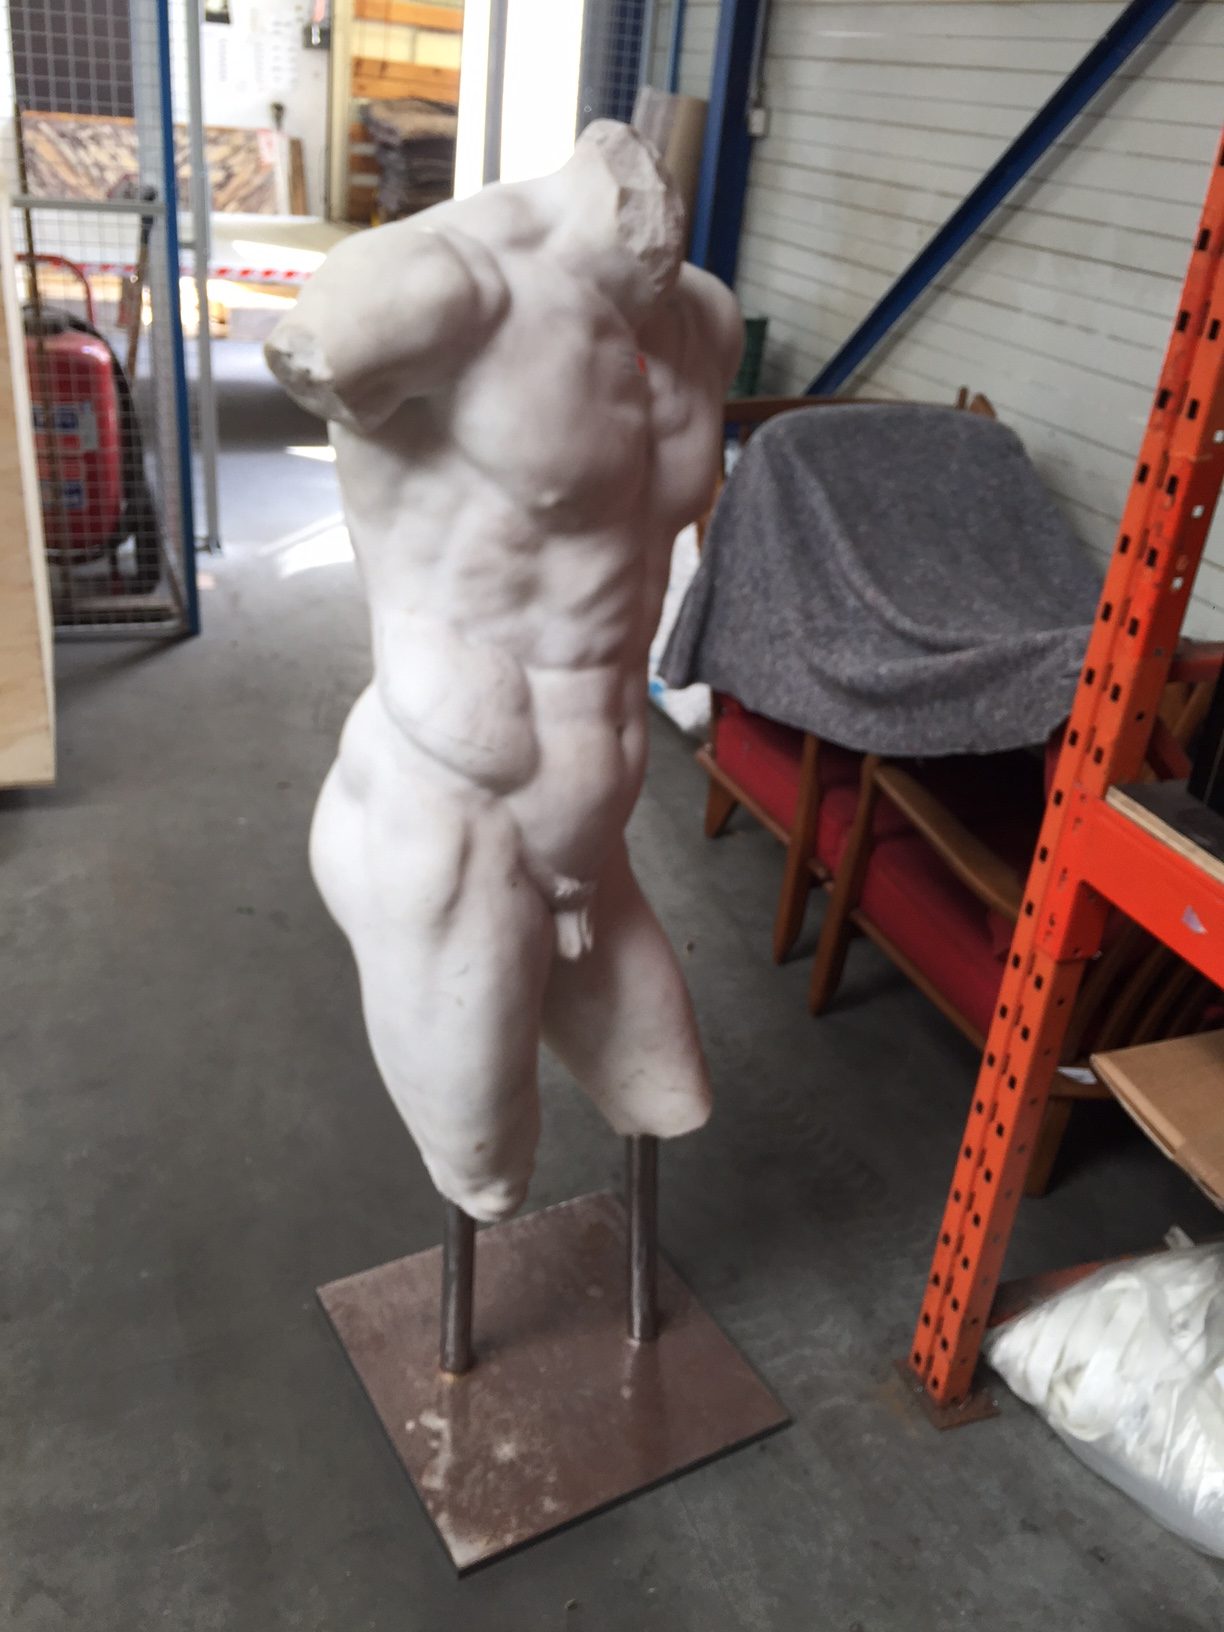 At an Antiques Dealer in Brussels: Crating, packing and shipping antique statuary